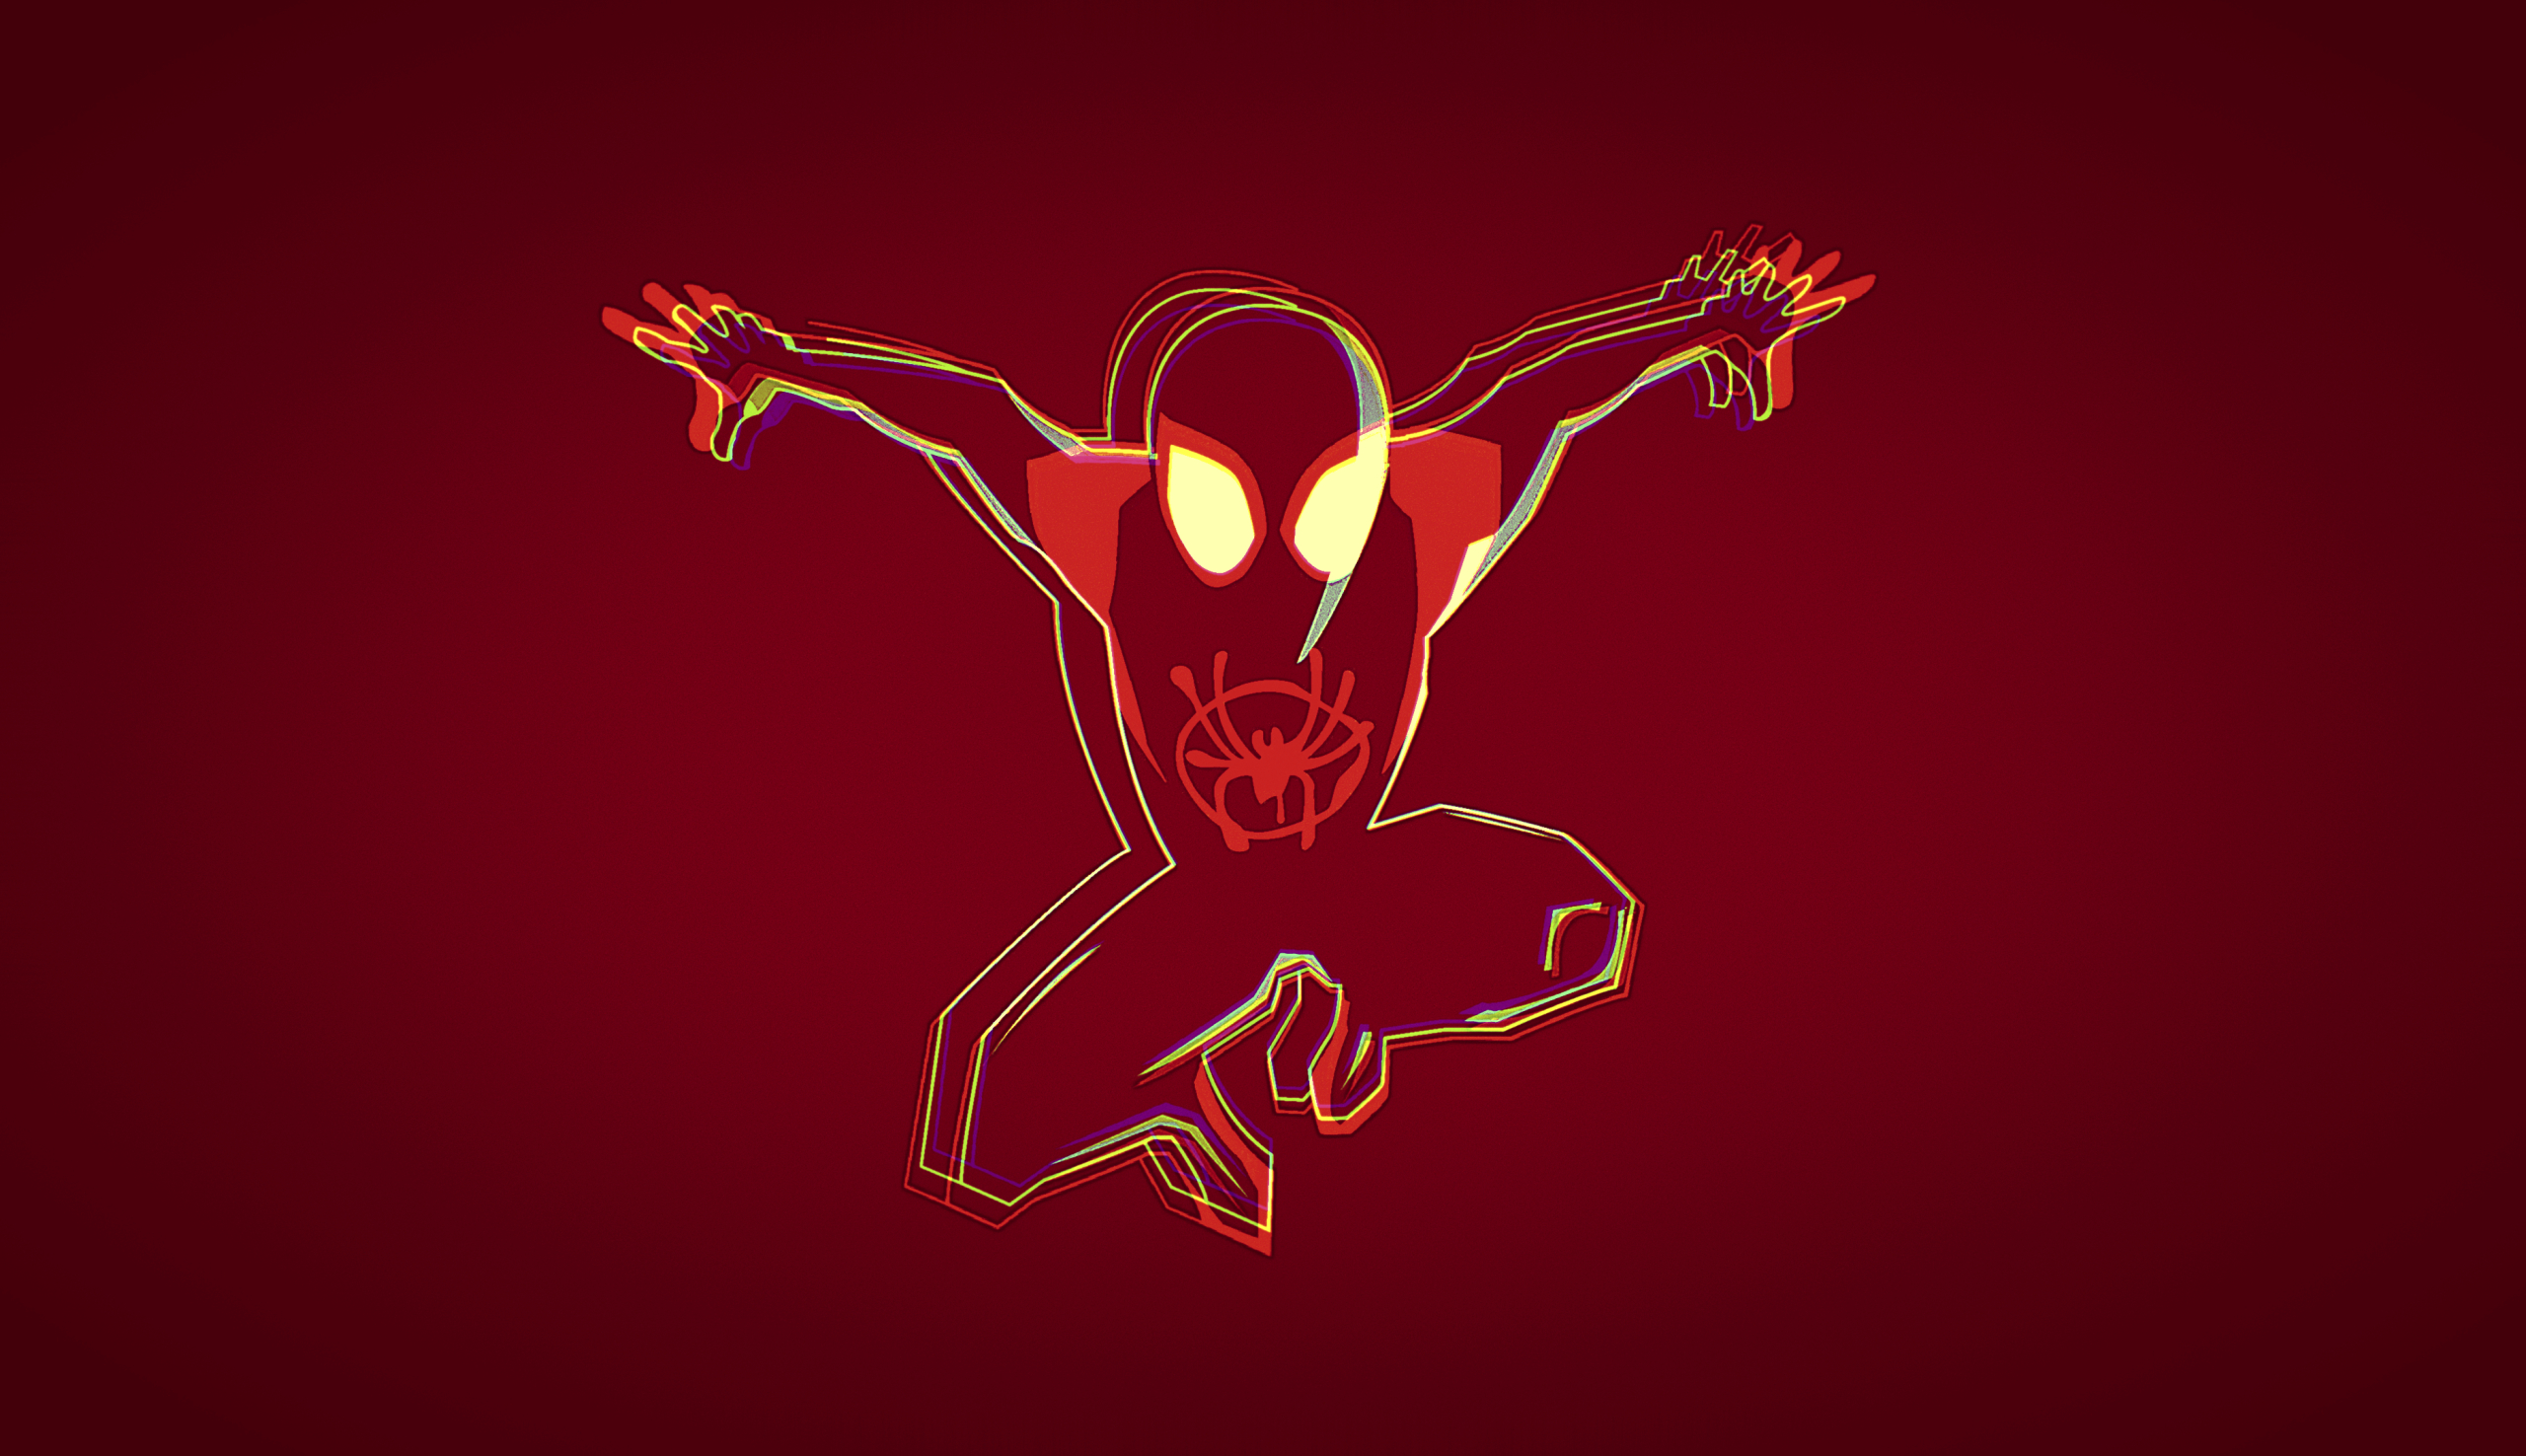 2560x1476 Minimalist Spiderman Into the Spider-Verse 4K 2560x1476  Resolution Wallpaper, HD Minimalist 4K Wallpapers, Images, Photos and  Background - Wallpapers Den